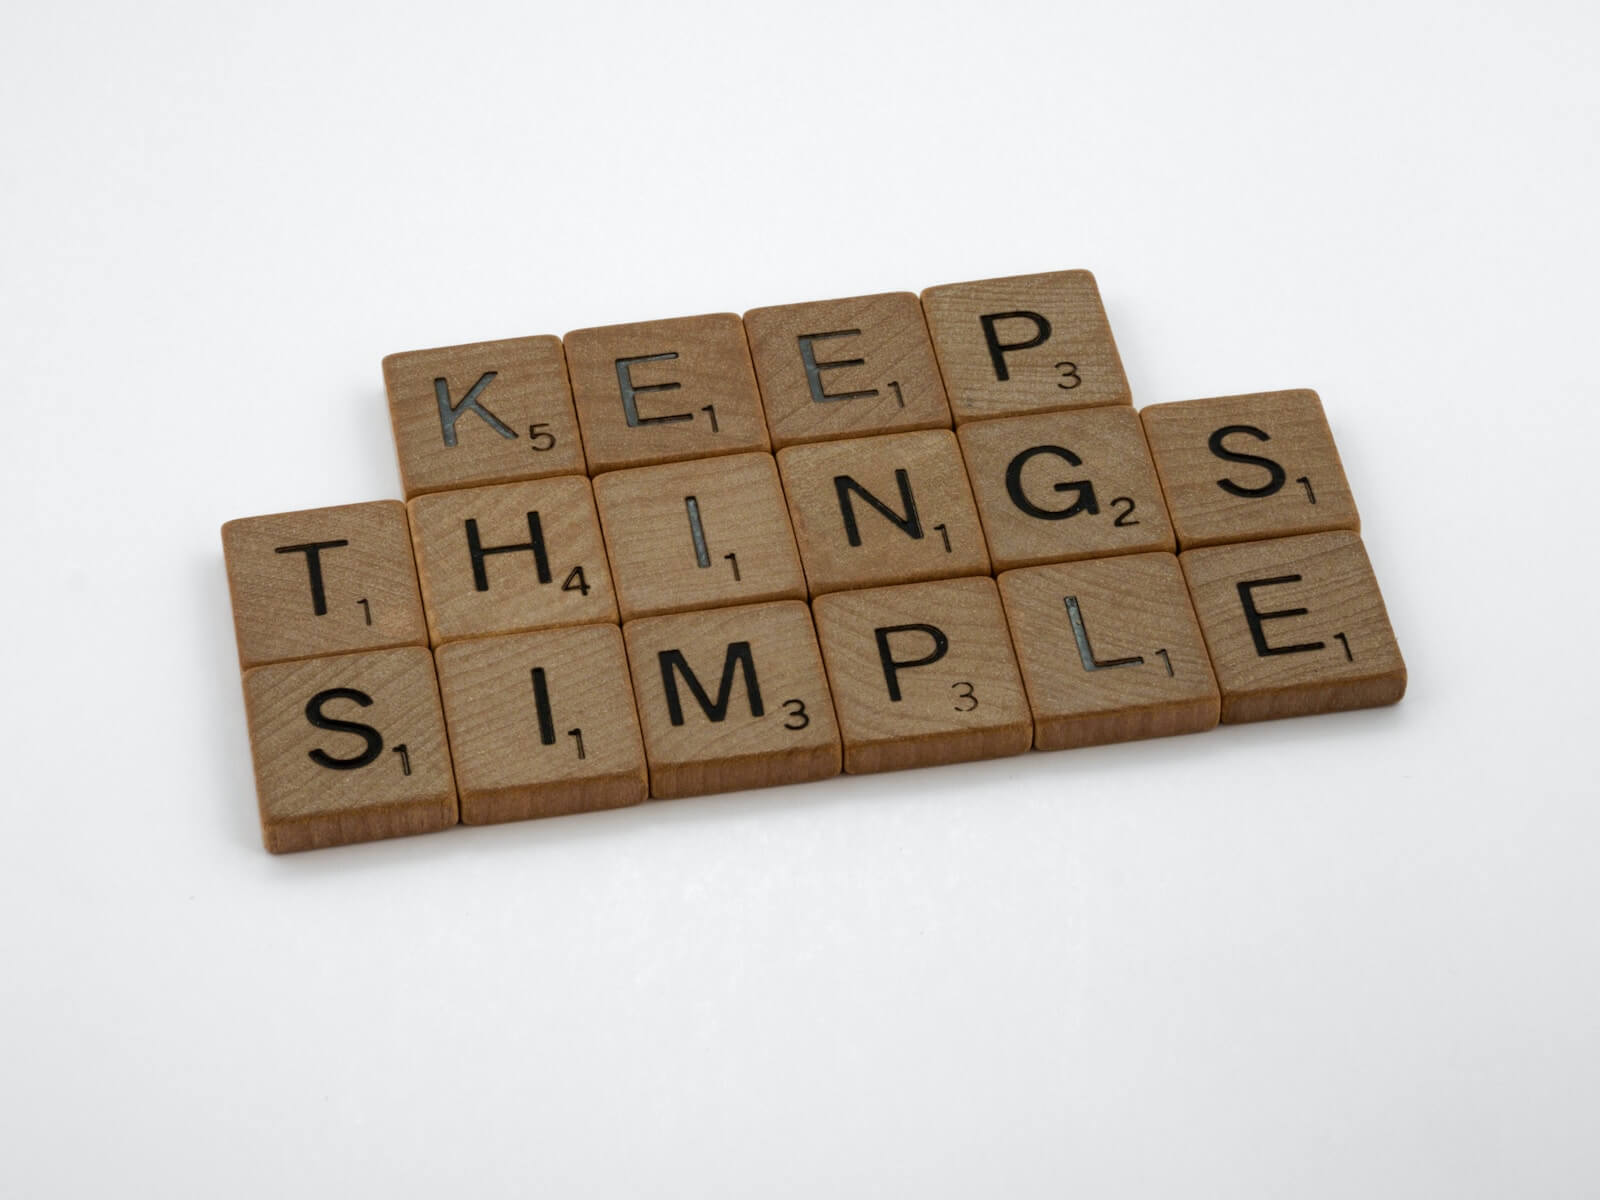 "Keep Things Simple" written with Scrabble tiles